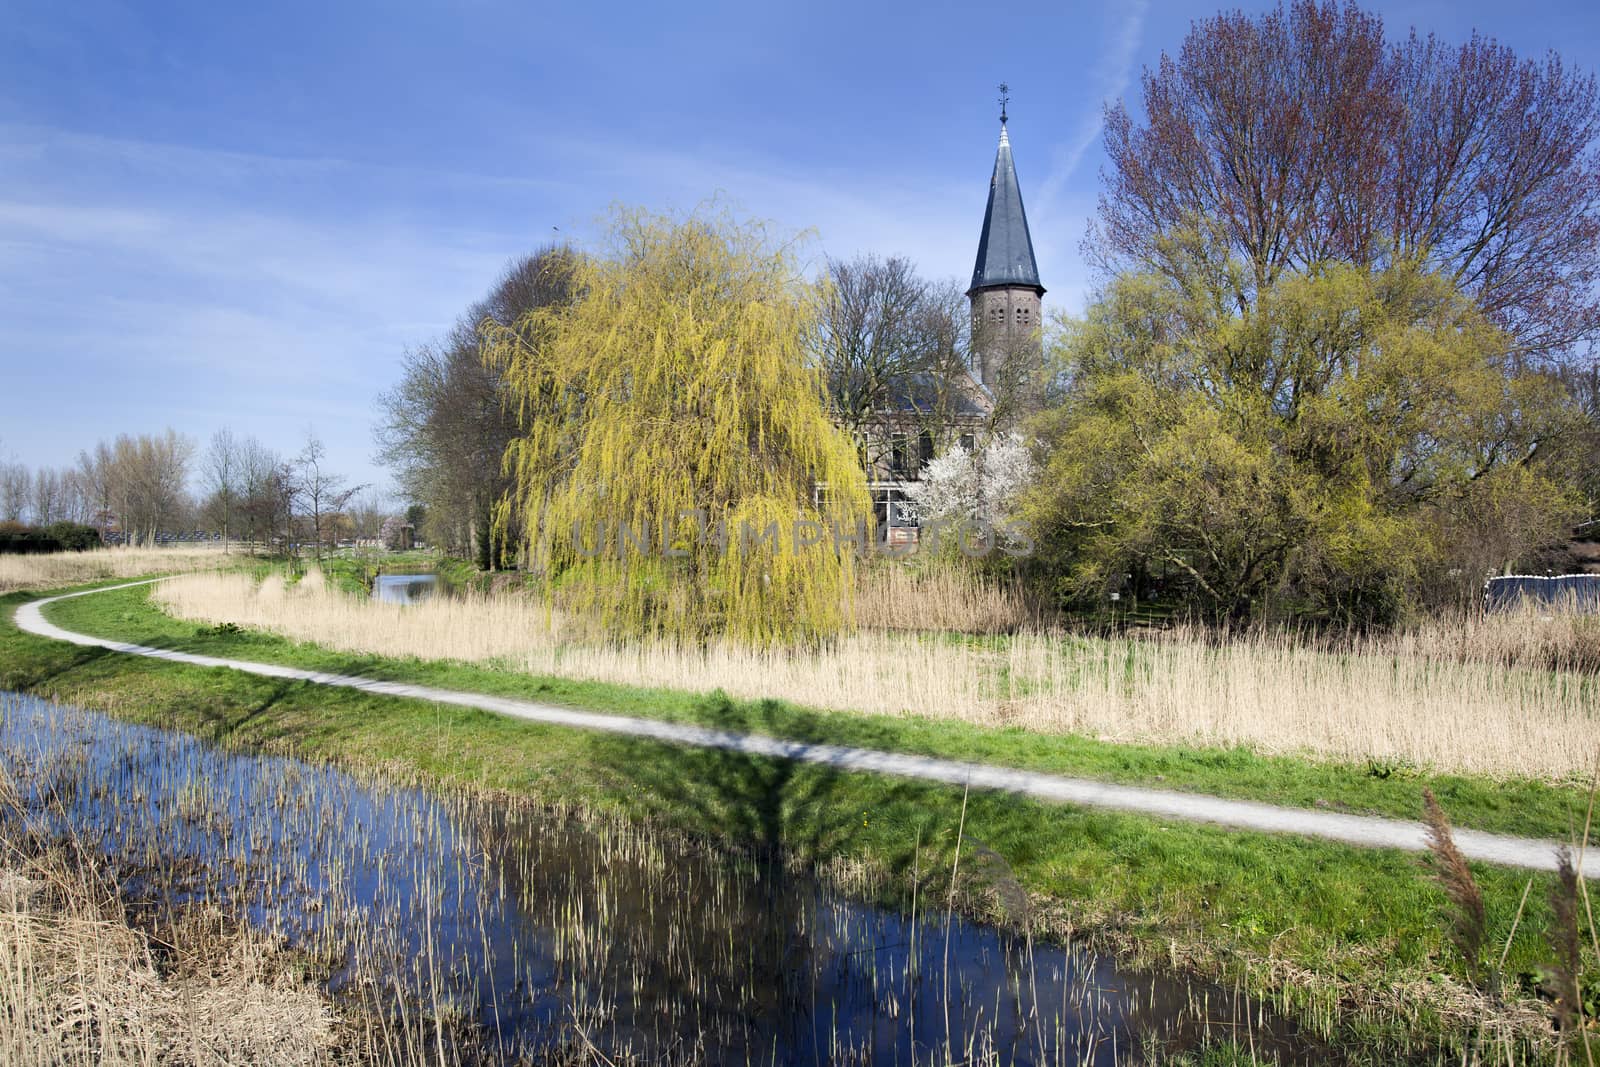 Footpath with church Jacobuskerk in village Kethel in the Netherlands